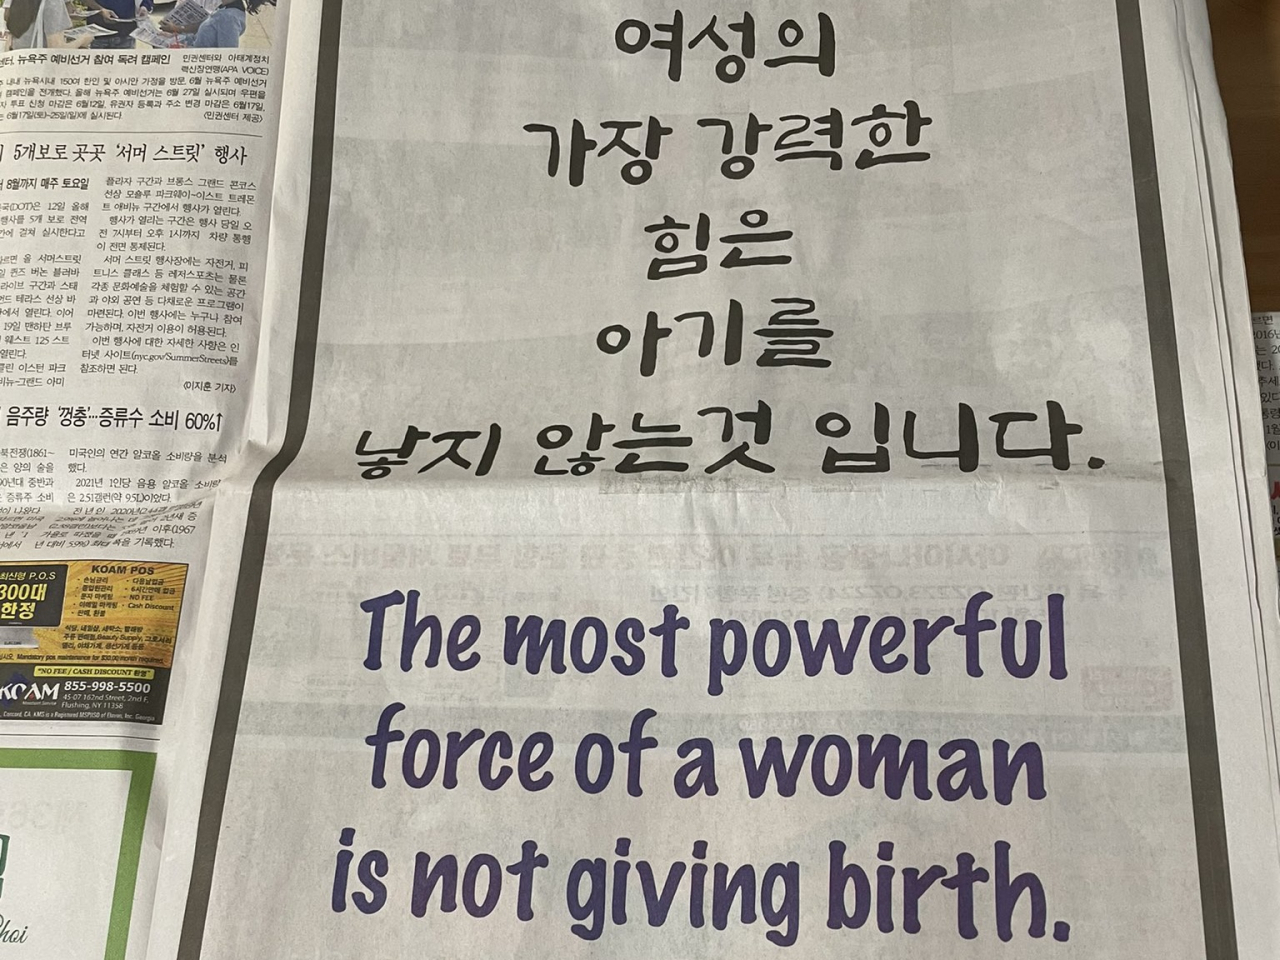 A photo of the US Korea Times ad posted on Twitter on June 17. (Twitter)